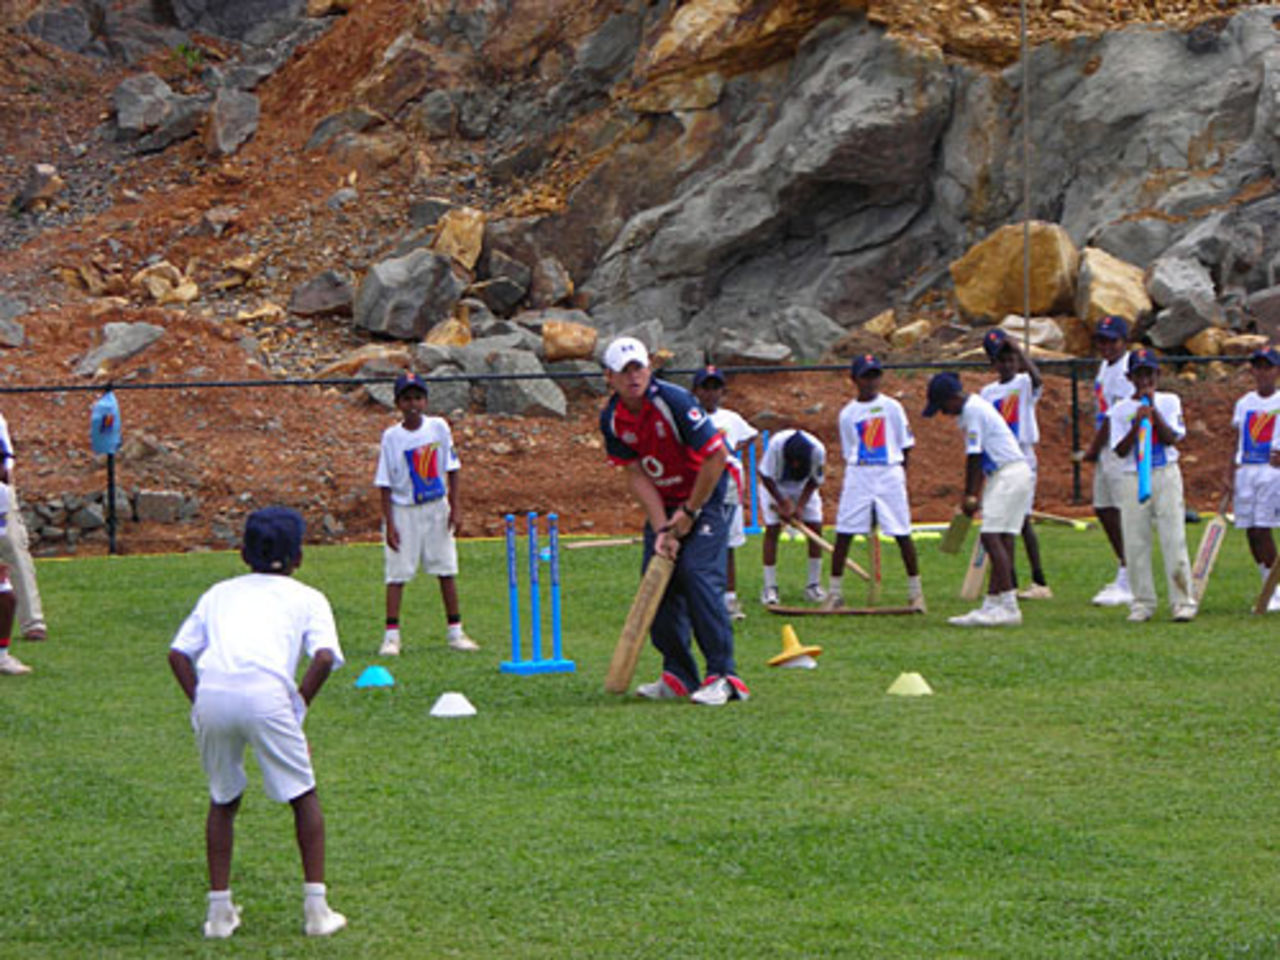 Ian Bell at a Spirit of Cricket skills programme in Galle, December 16, 2007